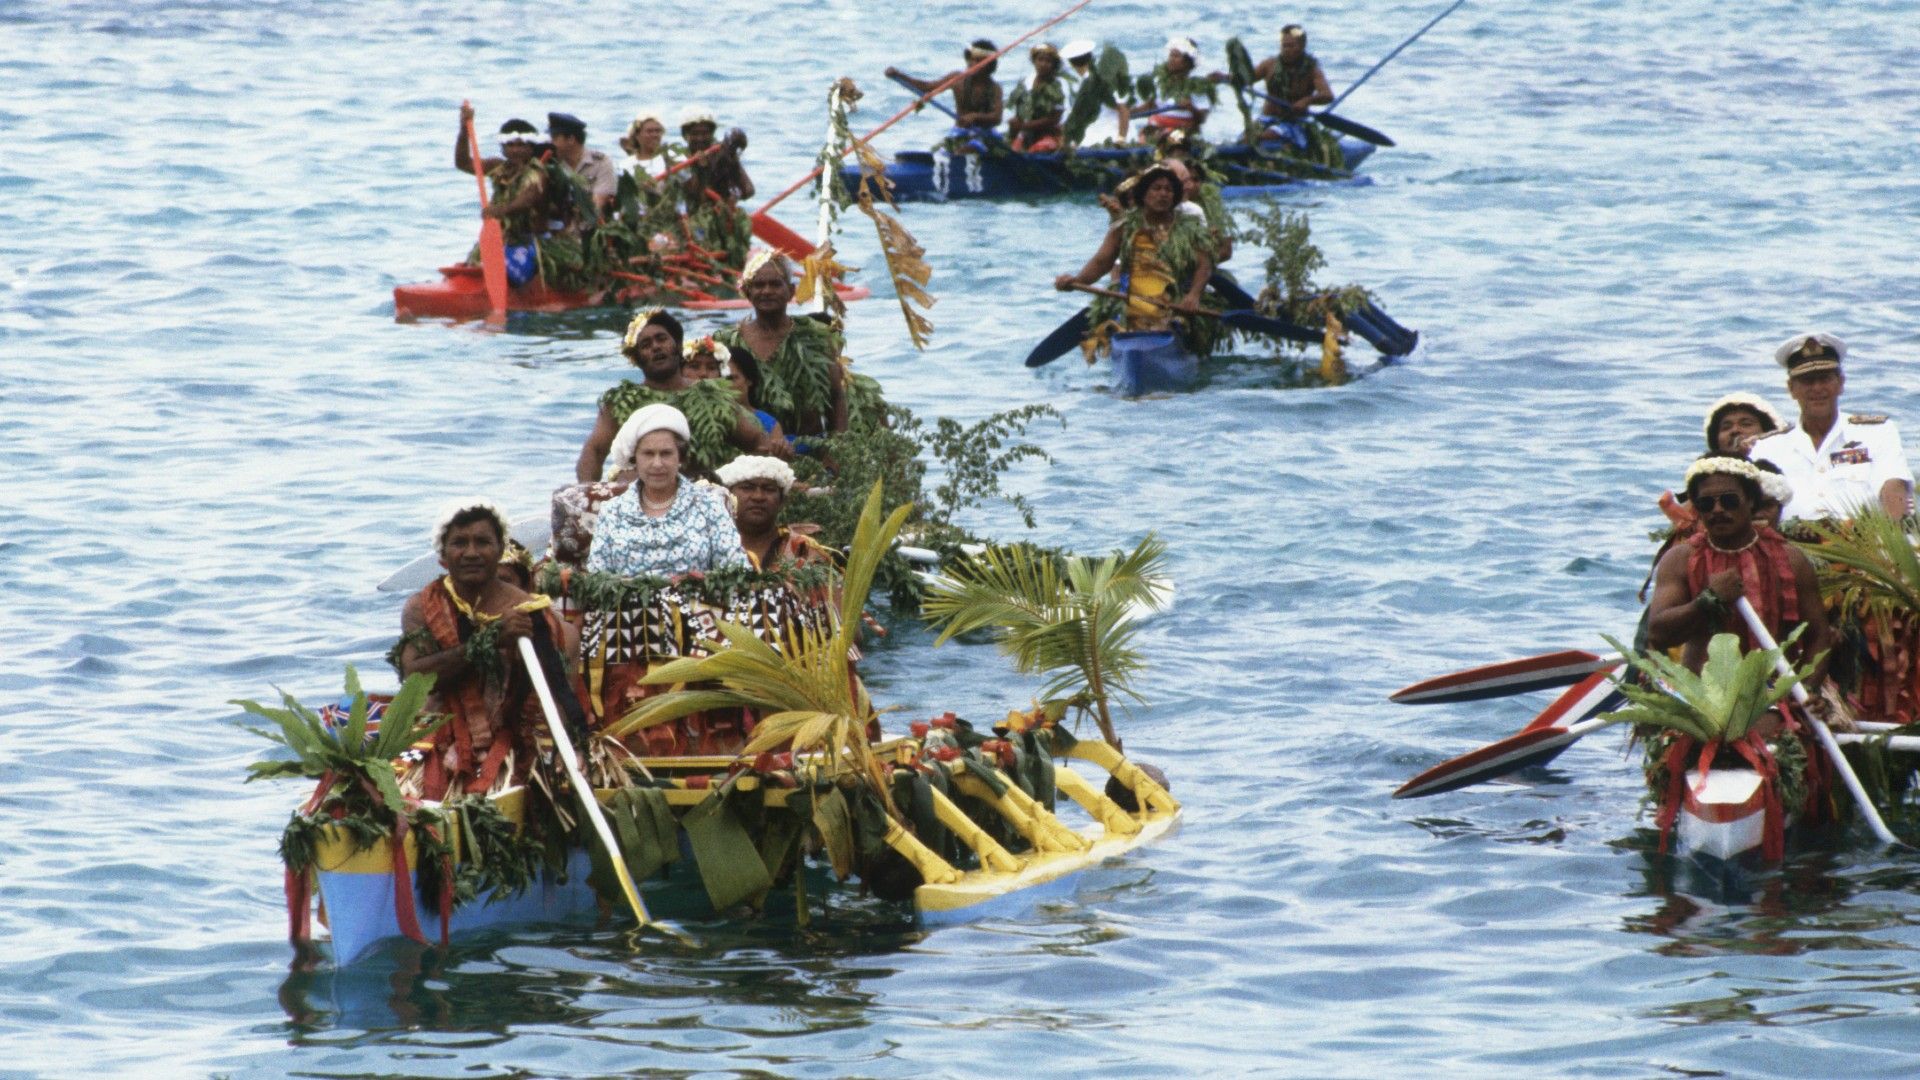 <p>                     On the Queen and Elizabeth’s trip to Tuvalu in October of 1982 – their first royal trip to the island nation – the couple travelled there and back in the Royal Yacht Britannia, which they also used to move around the island.                   </p>                                      <p>                     But the yacht was unable to dock in the shallow water around Tuvalu, so the couple were required to be transported from the yacht to the shore and back, giving us one of the best Queen Elizabeth tour moments ever. The Queen and Philip were transported on a fleet of canoes that had been elaborately decorated by the locals, with the monarch in one and her husband in another. What a great moment!                   </p>